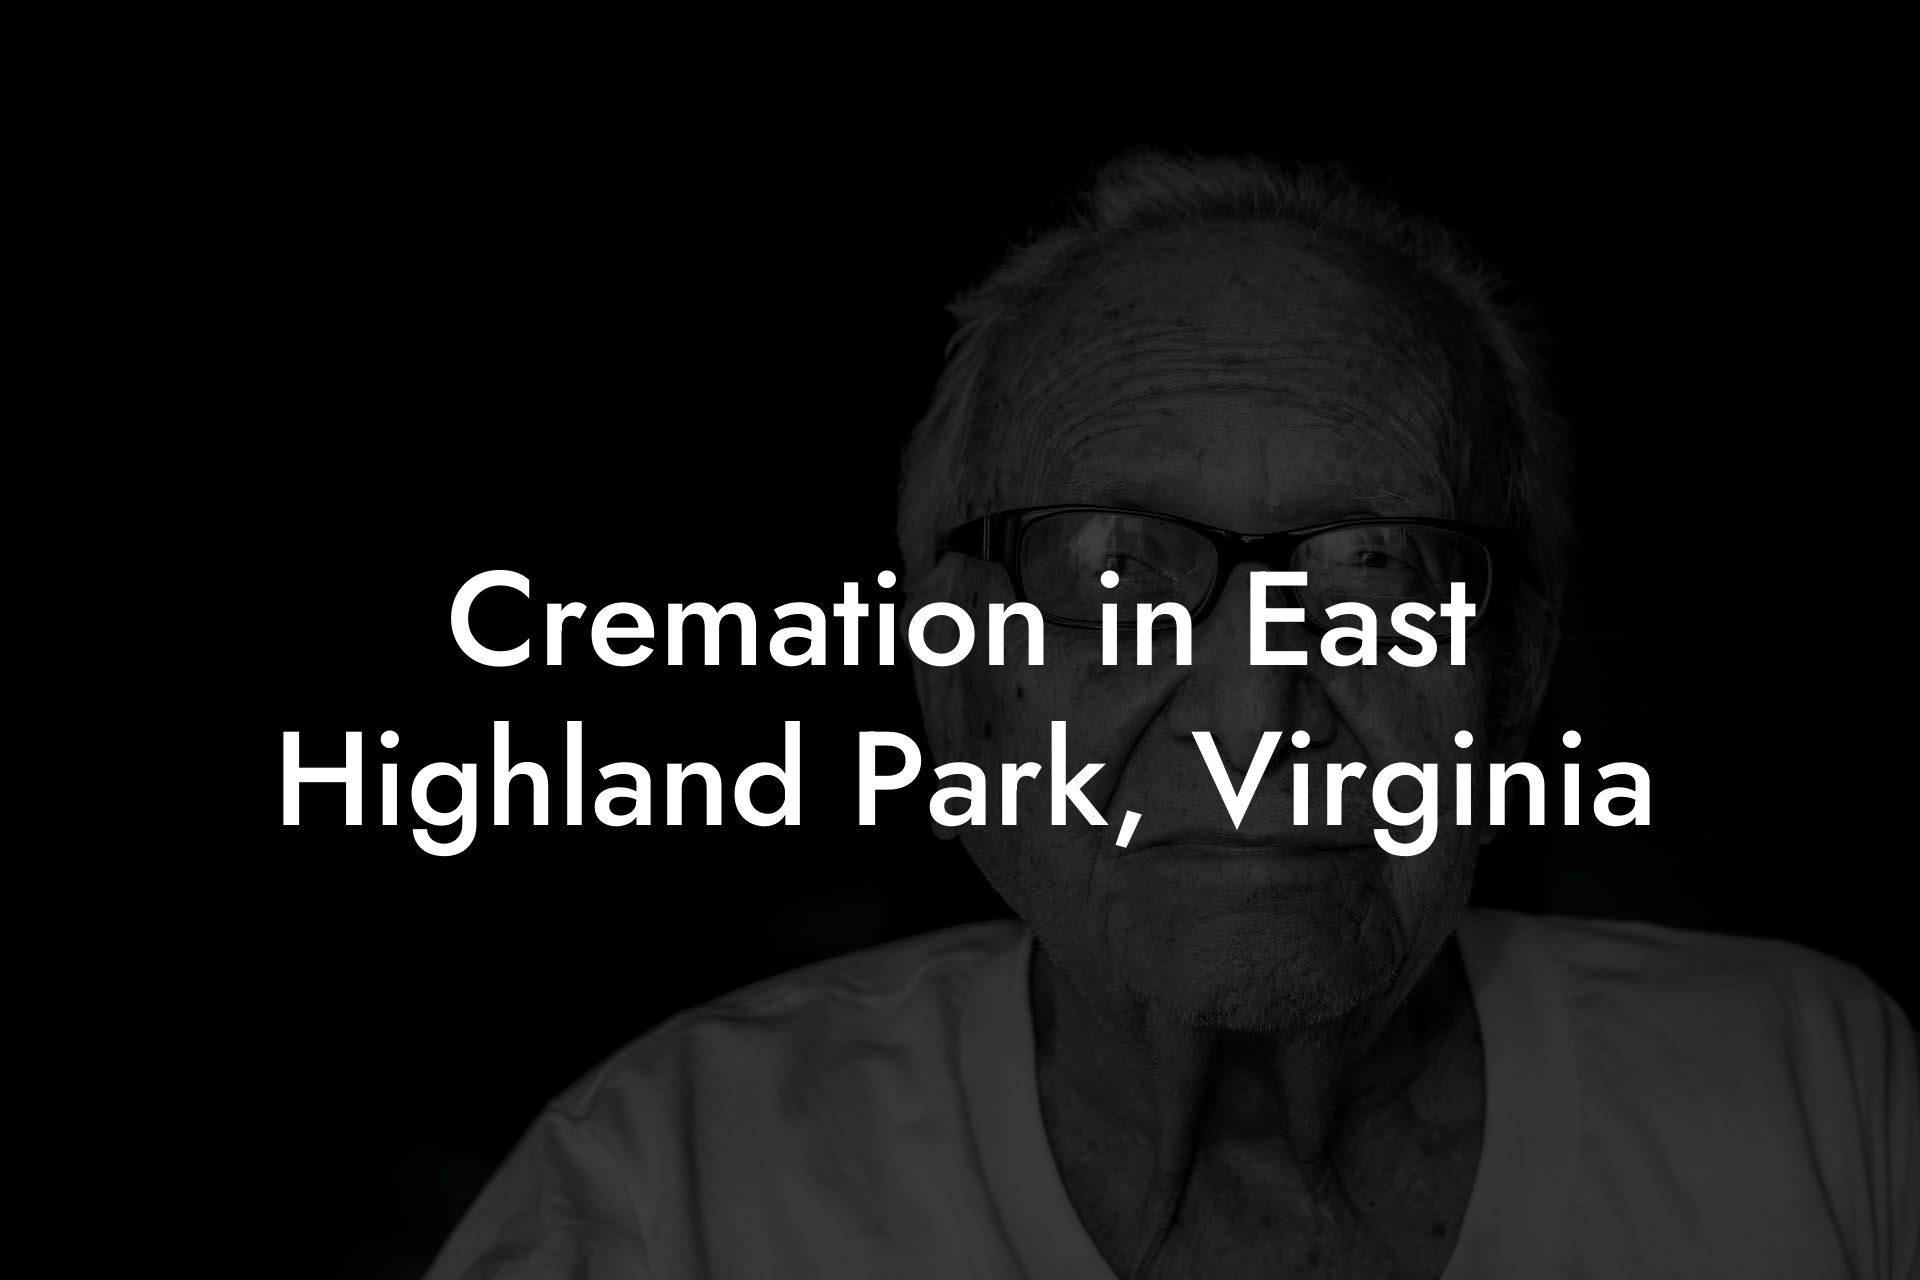 Cremation in East Highland Park, Virginia